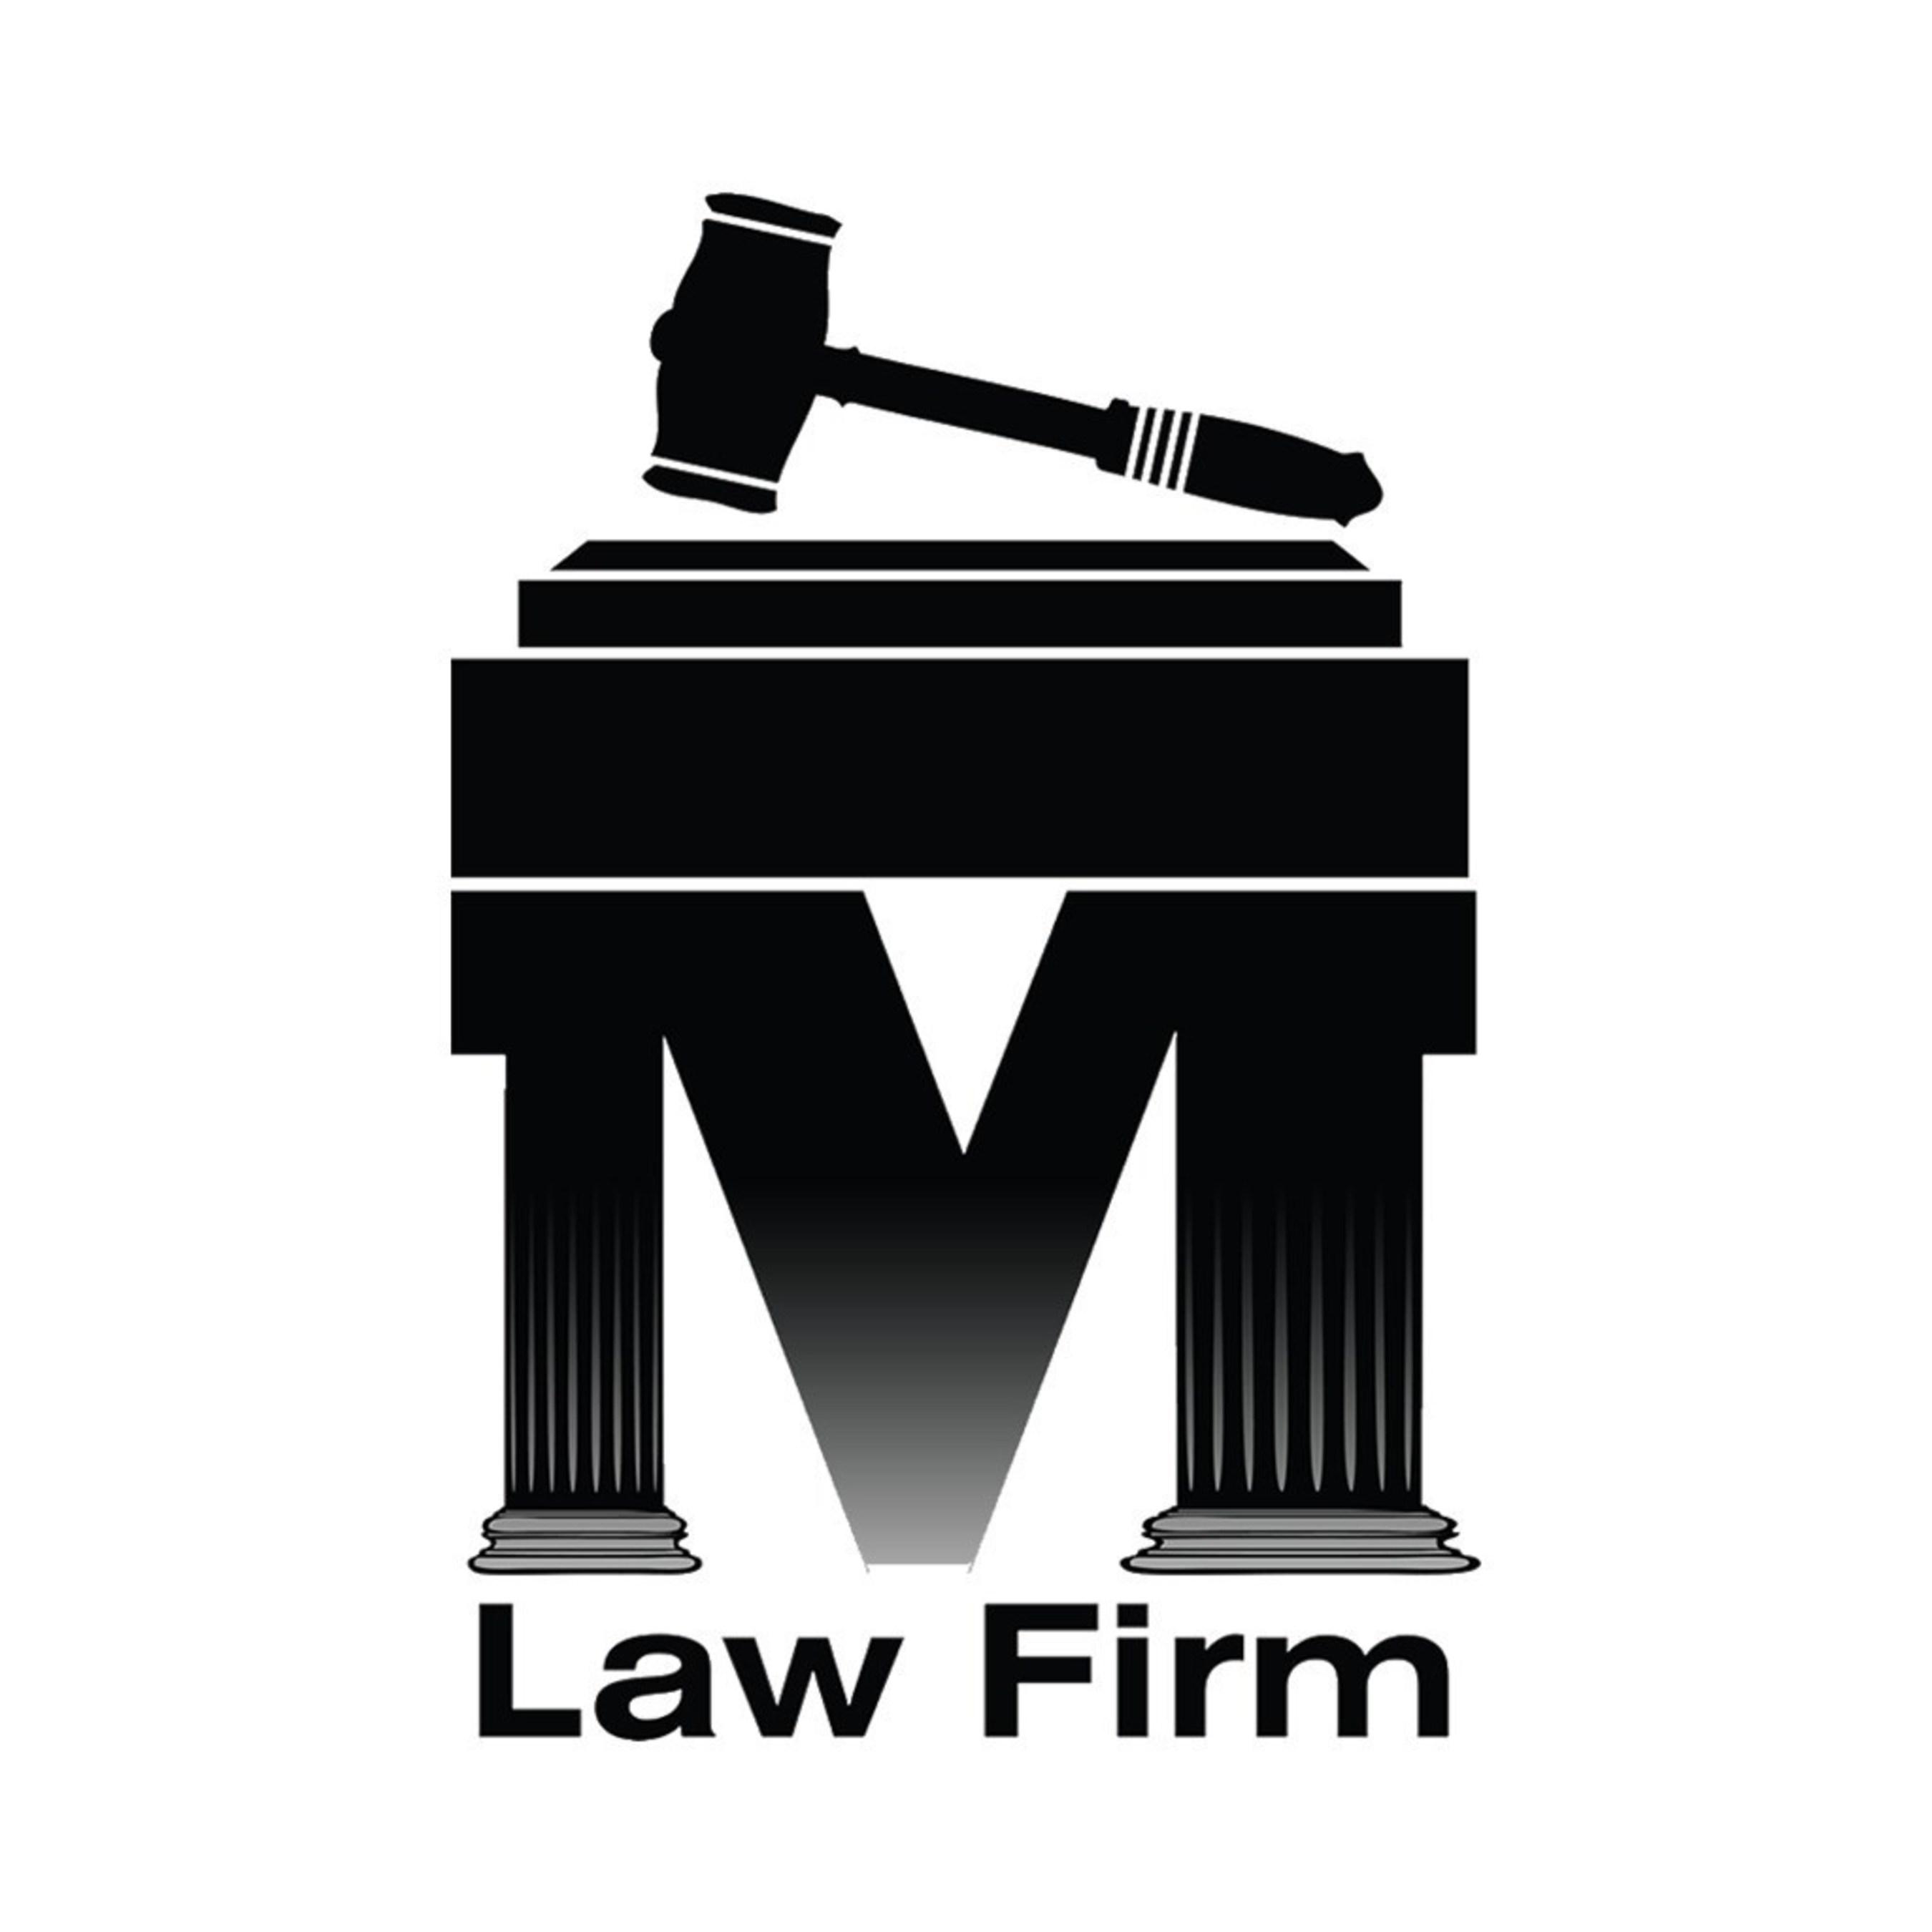 NY Workman Compensation Lawyer - 212.400.4000